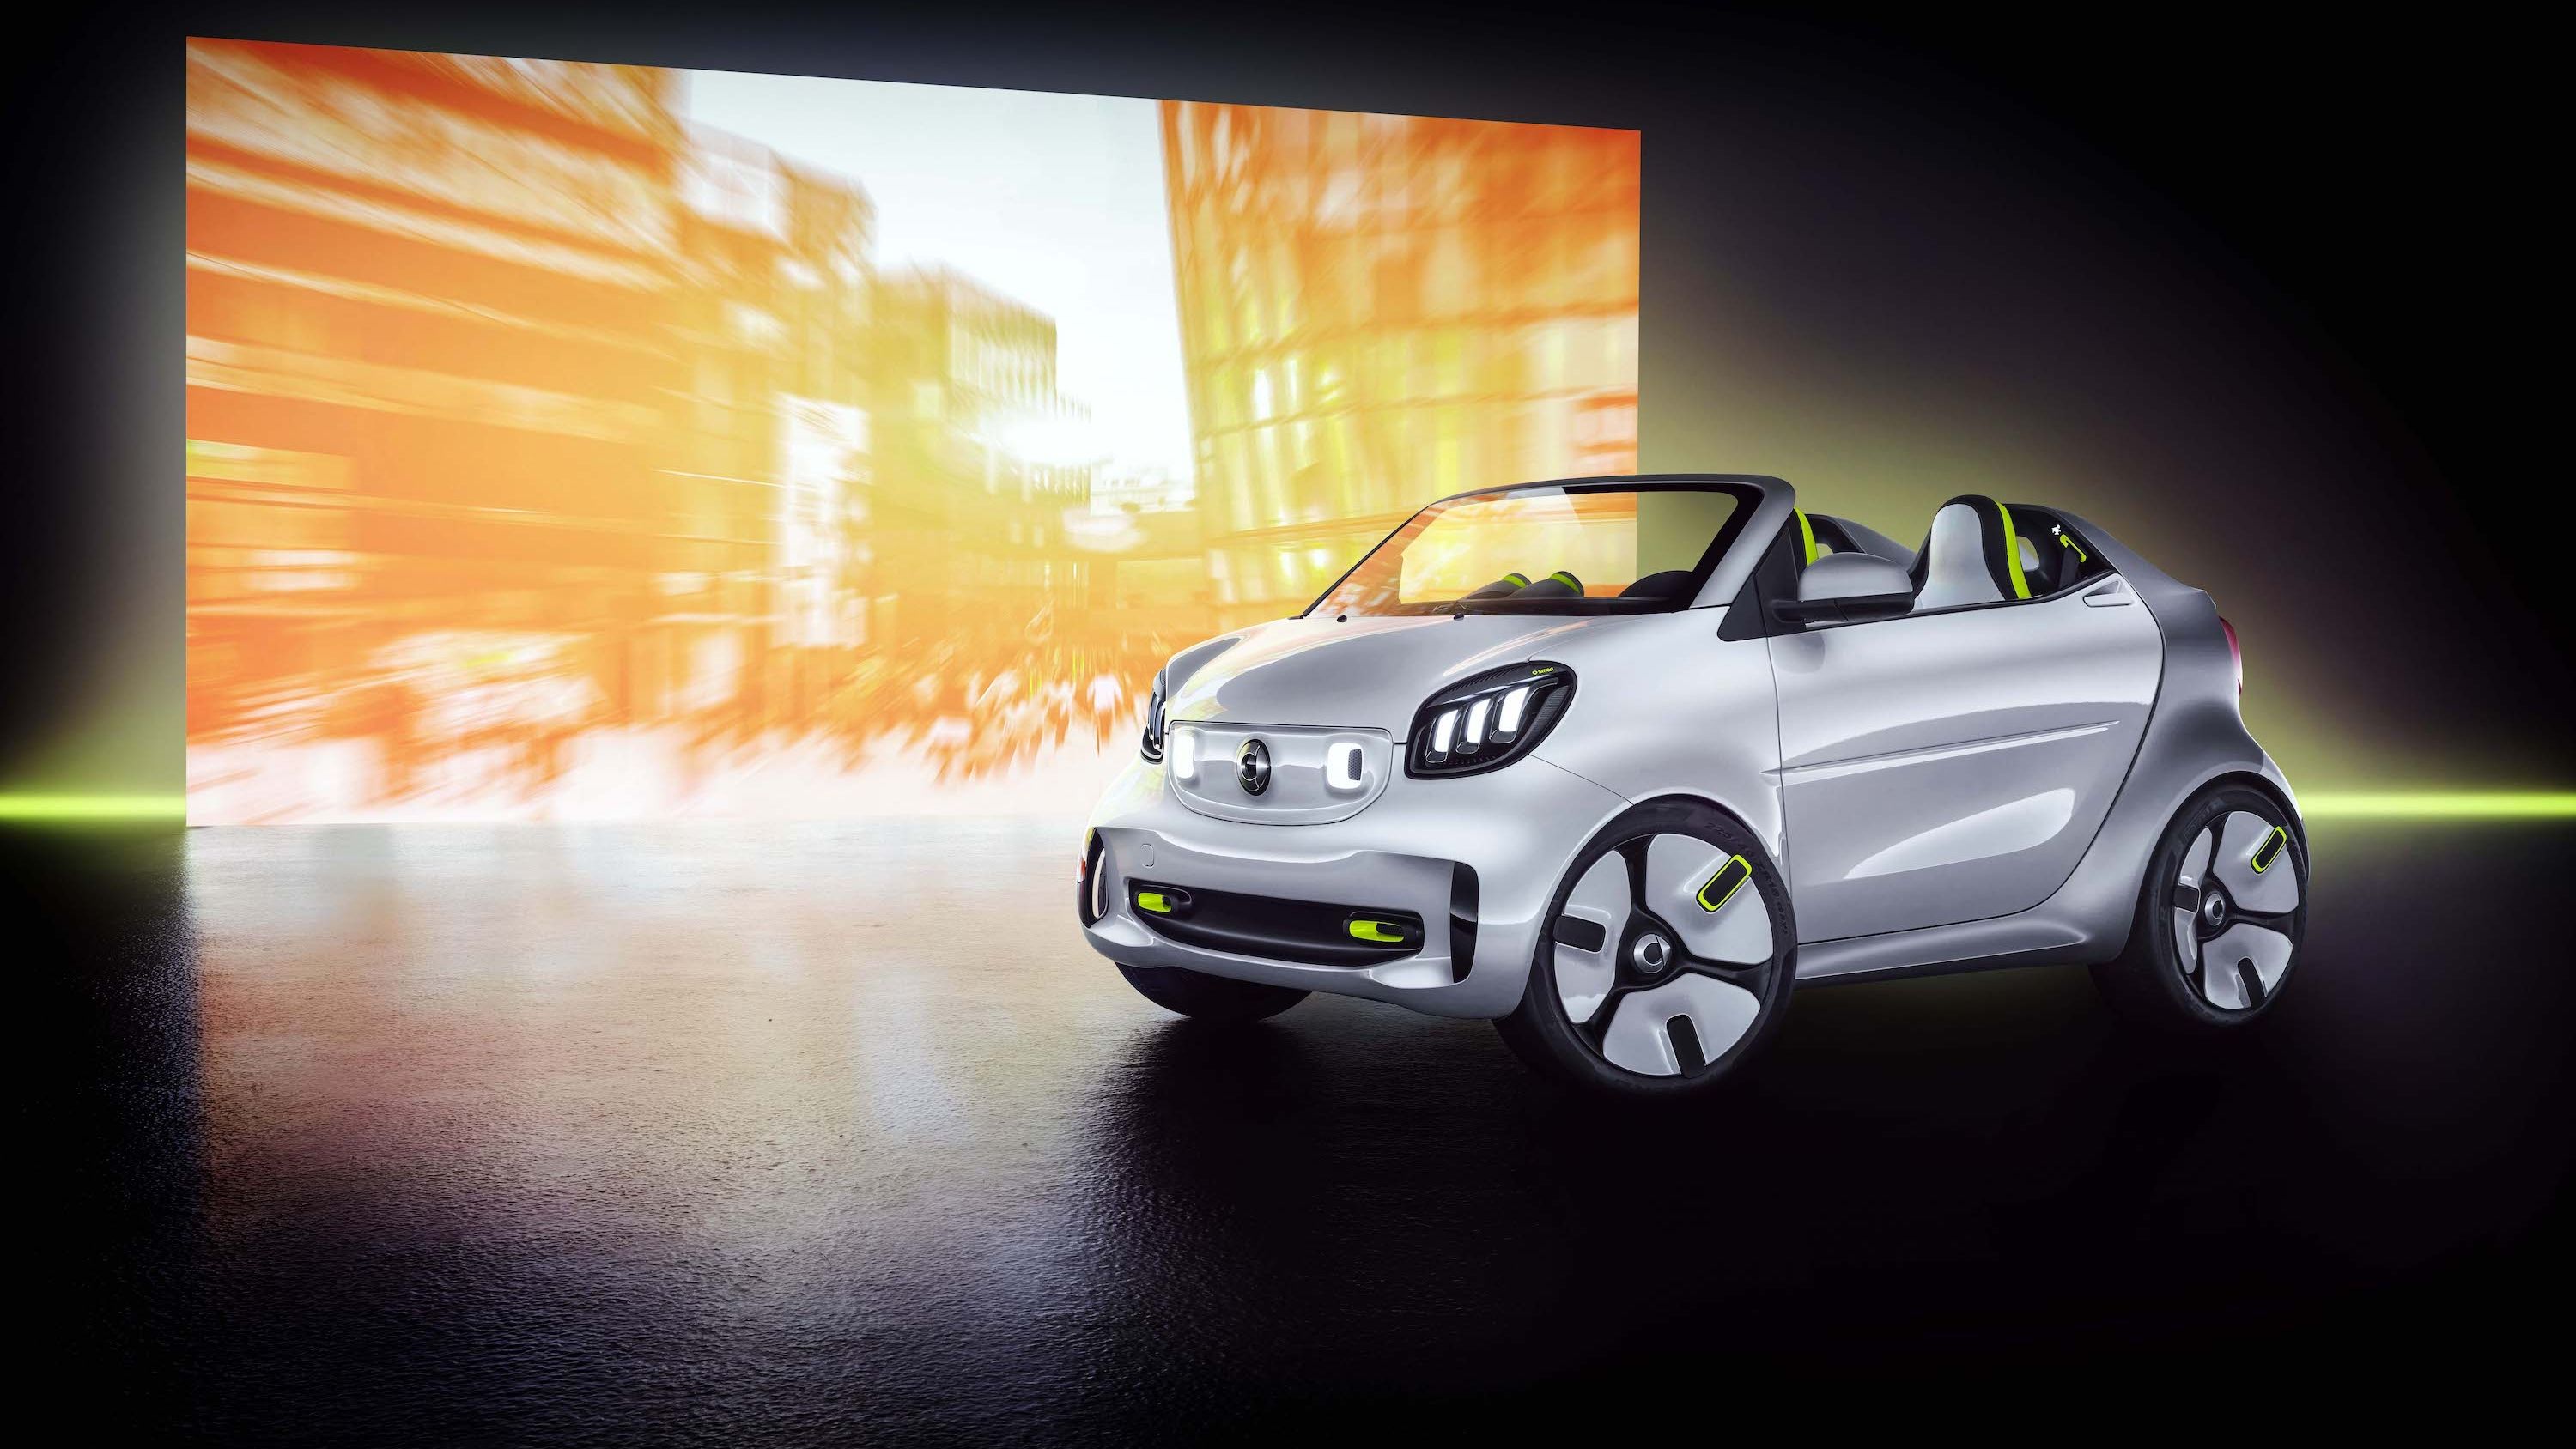 2018 Smart ForEase Concept